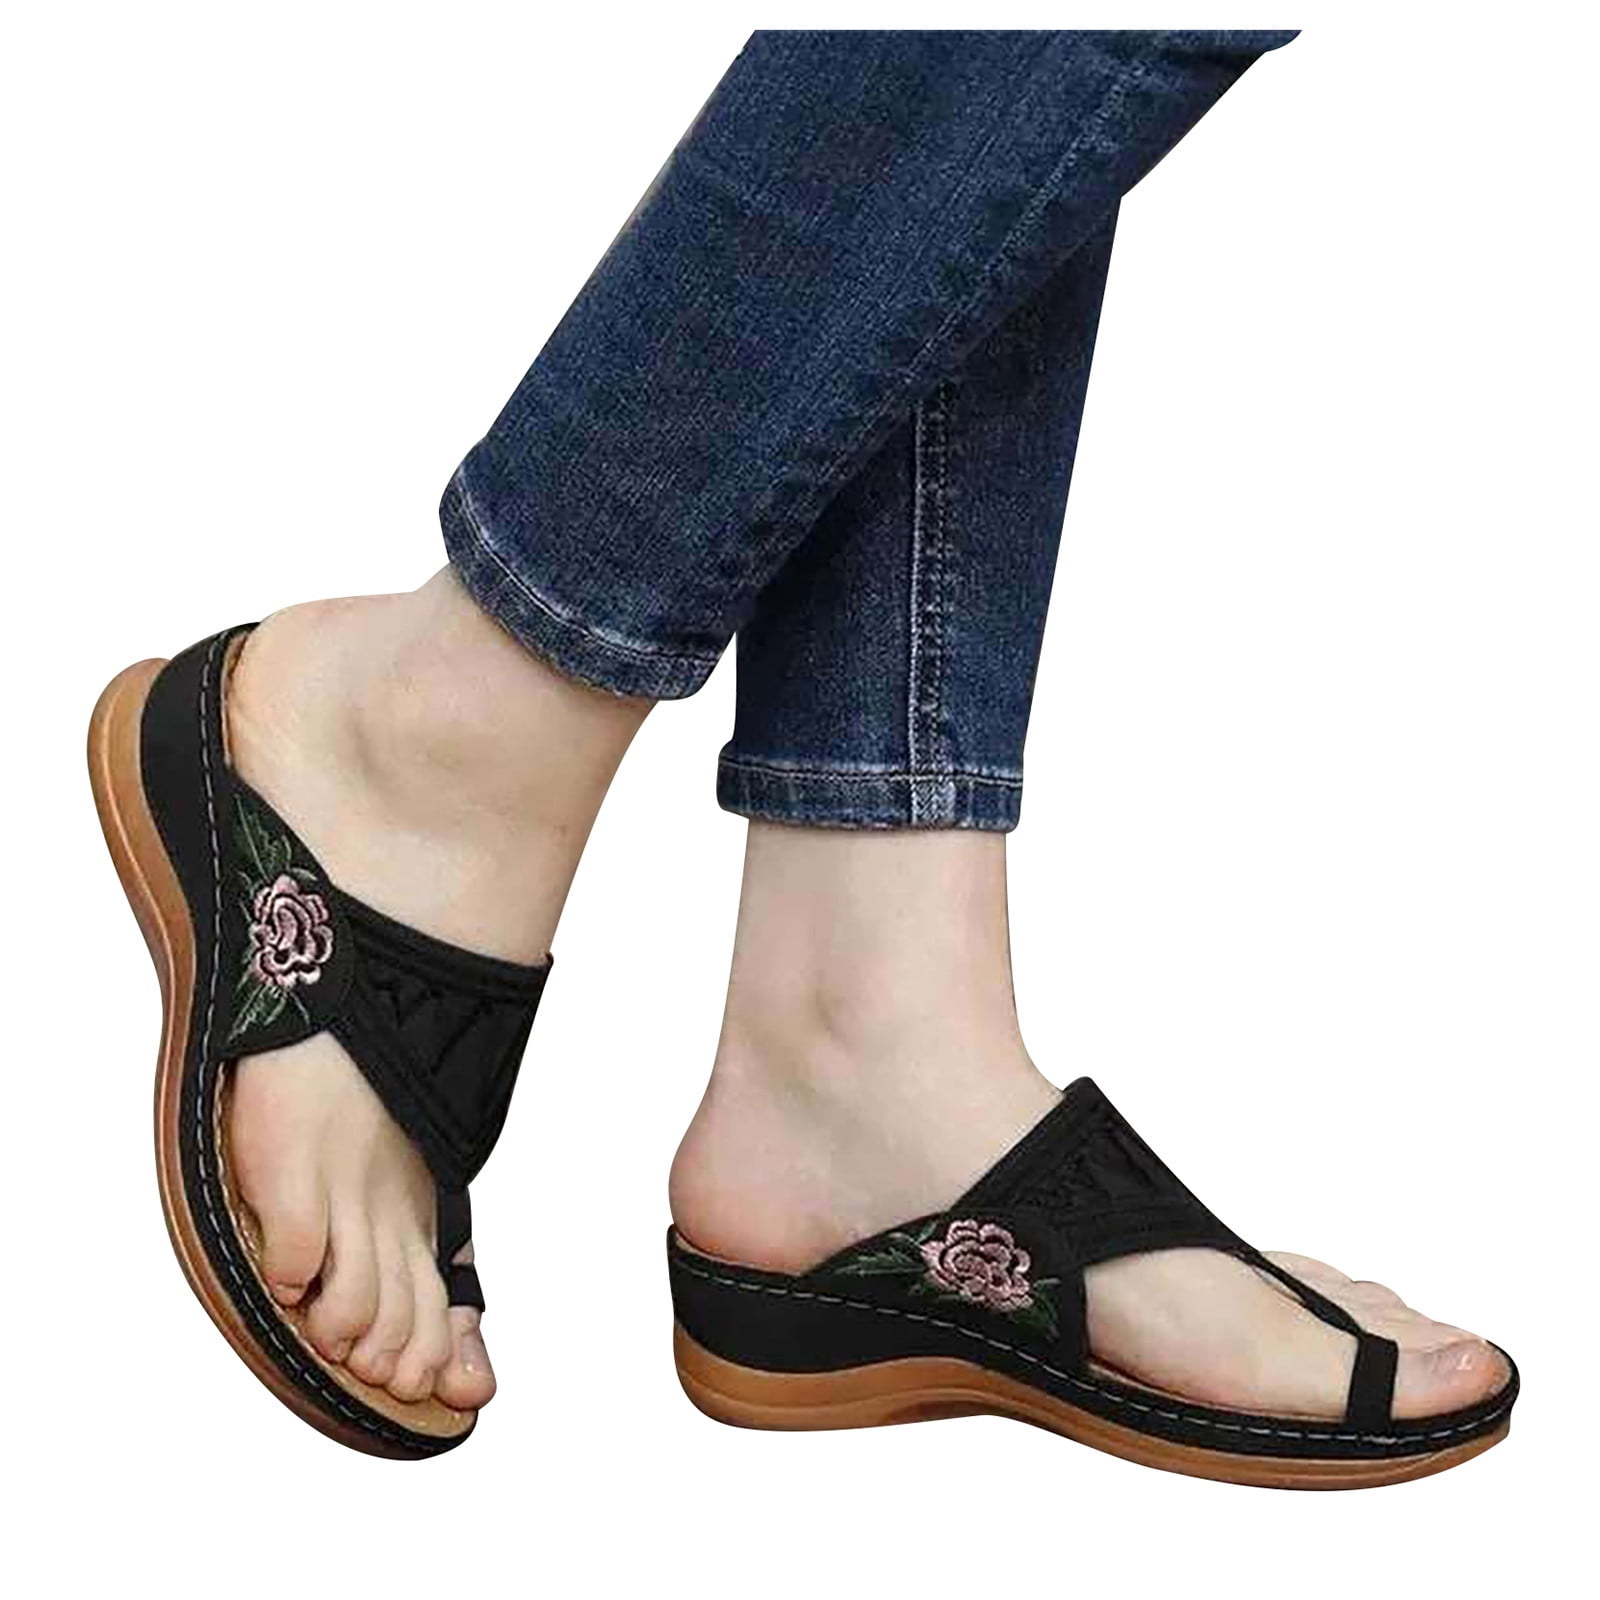 Details about   Women Students Shoes Comfortable Sandals Female Pumps Jelly  Beach Slipper